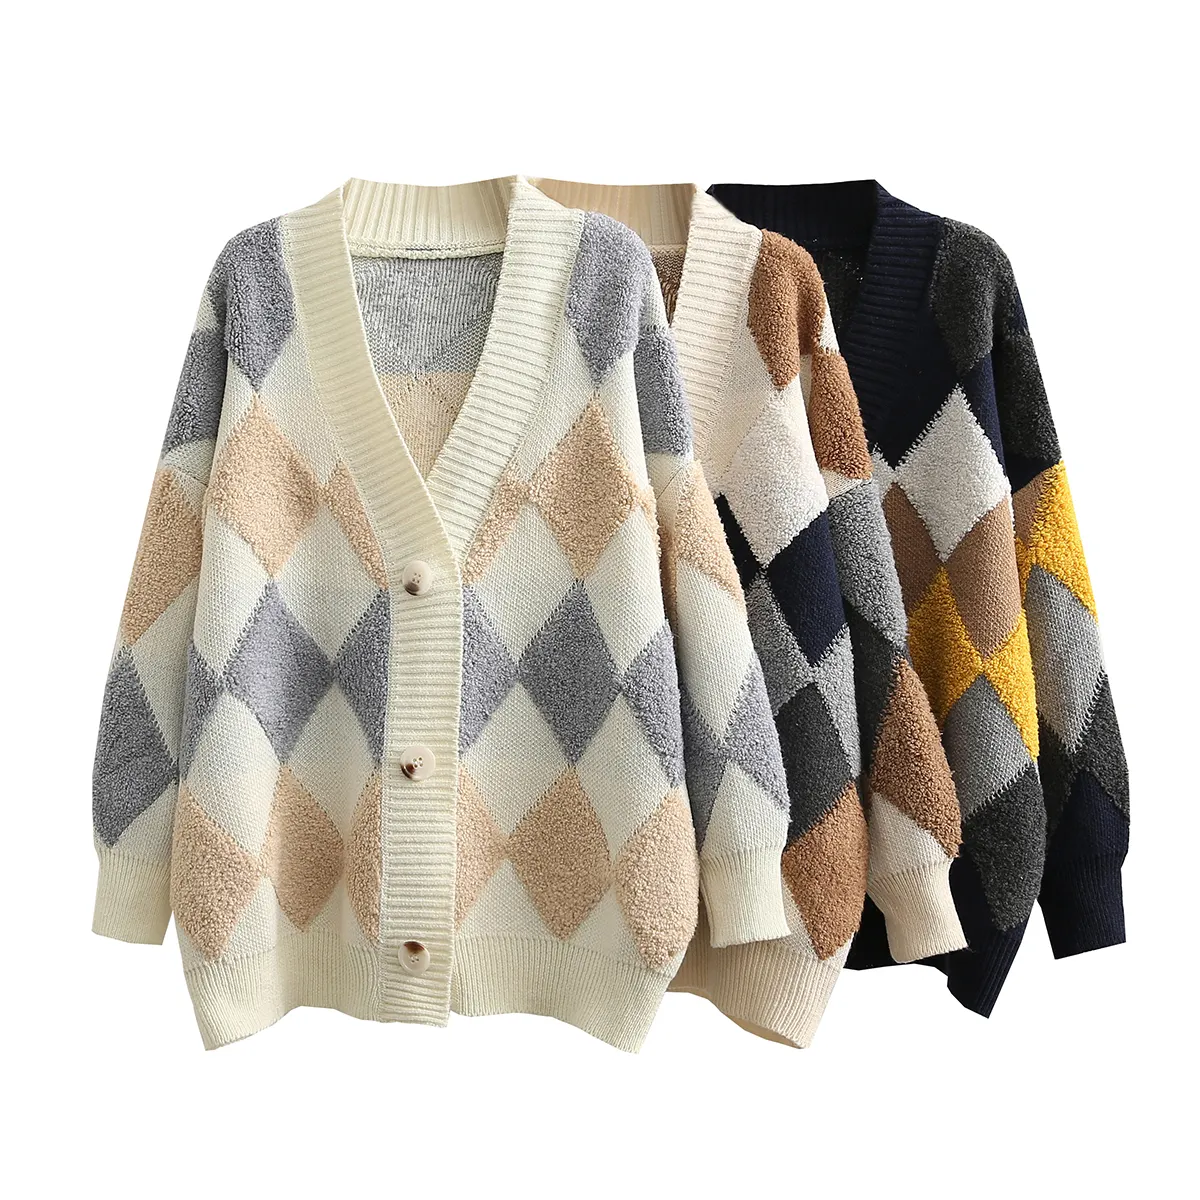 3 colorway multi color v neck single breasted long sleeve casual fashion women cardigan sweater